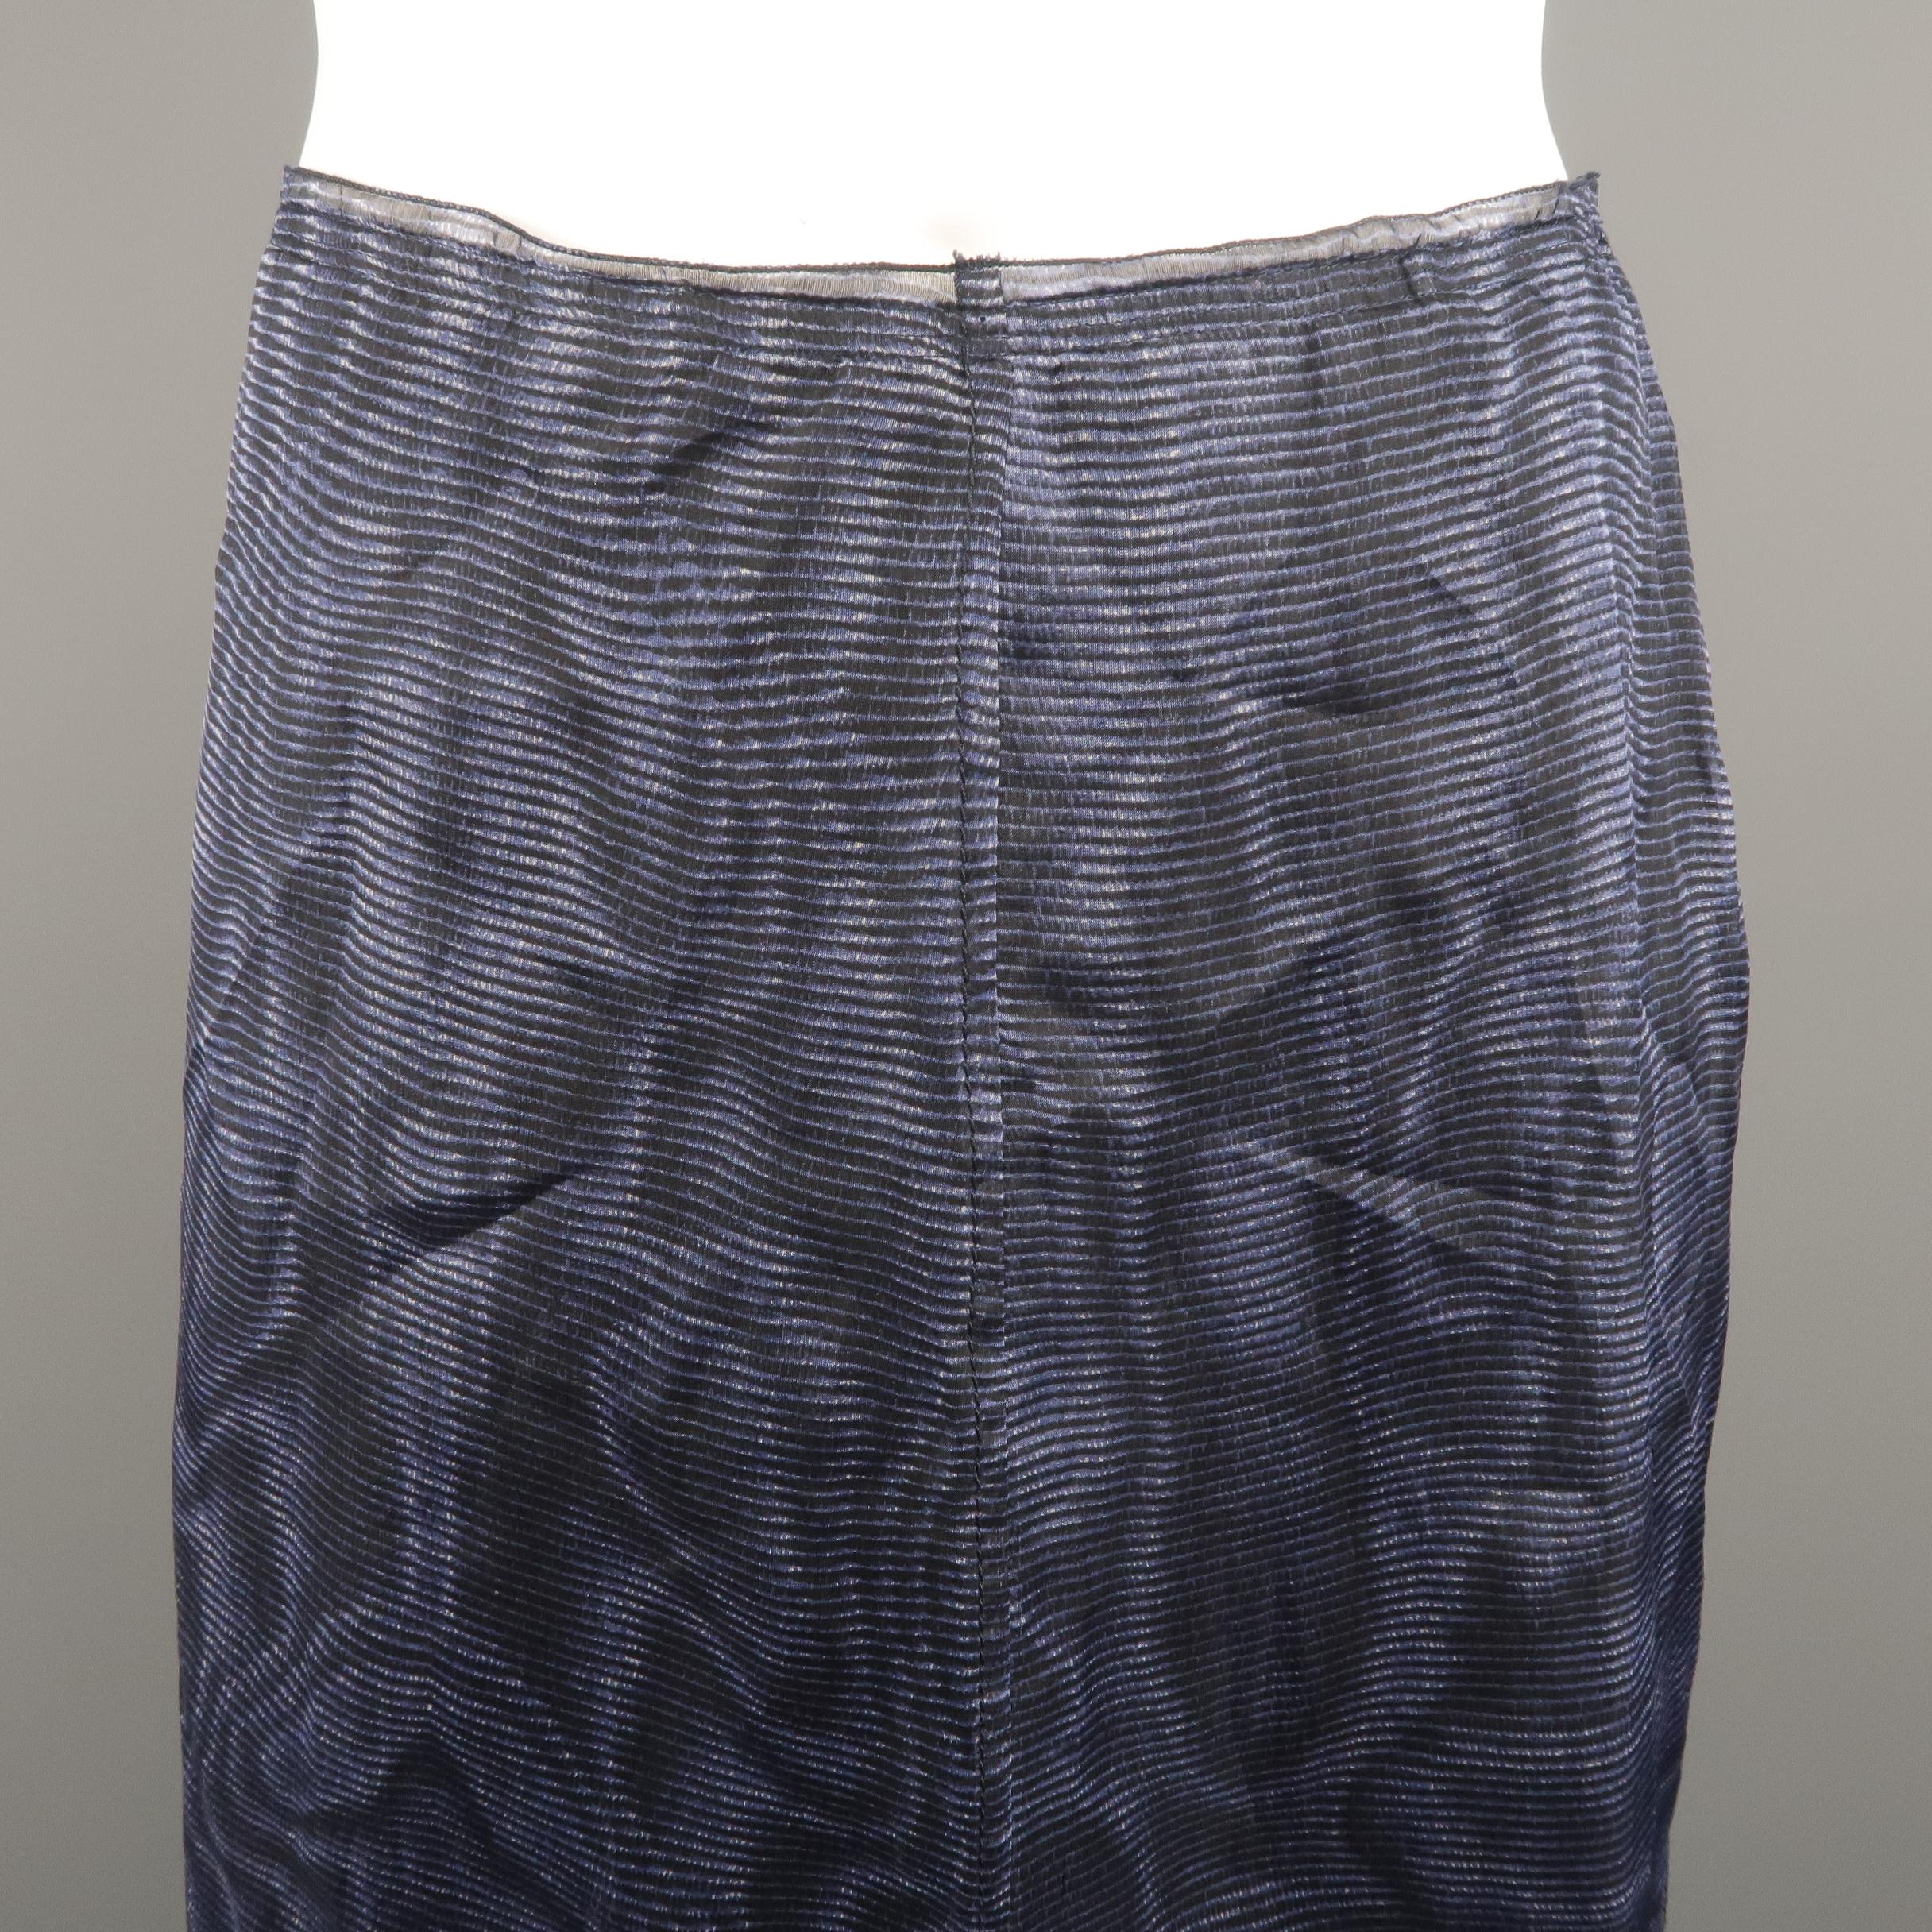 PRADA classic pencil skirt, come in blue tones and silk moare material, featuring see through overlay. Made in Italy.
 
Excellent Pre-Owned Condition.
Marked: 42 IT
 
Measurements:
 
Waist: 30 in.
Hip: 38 in.
Length: 28.5 in.